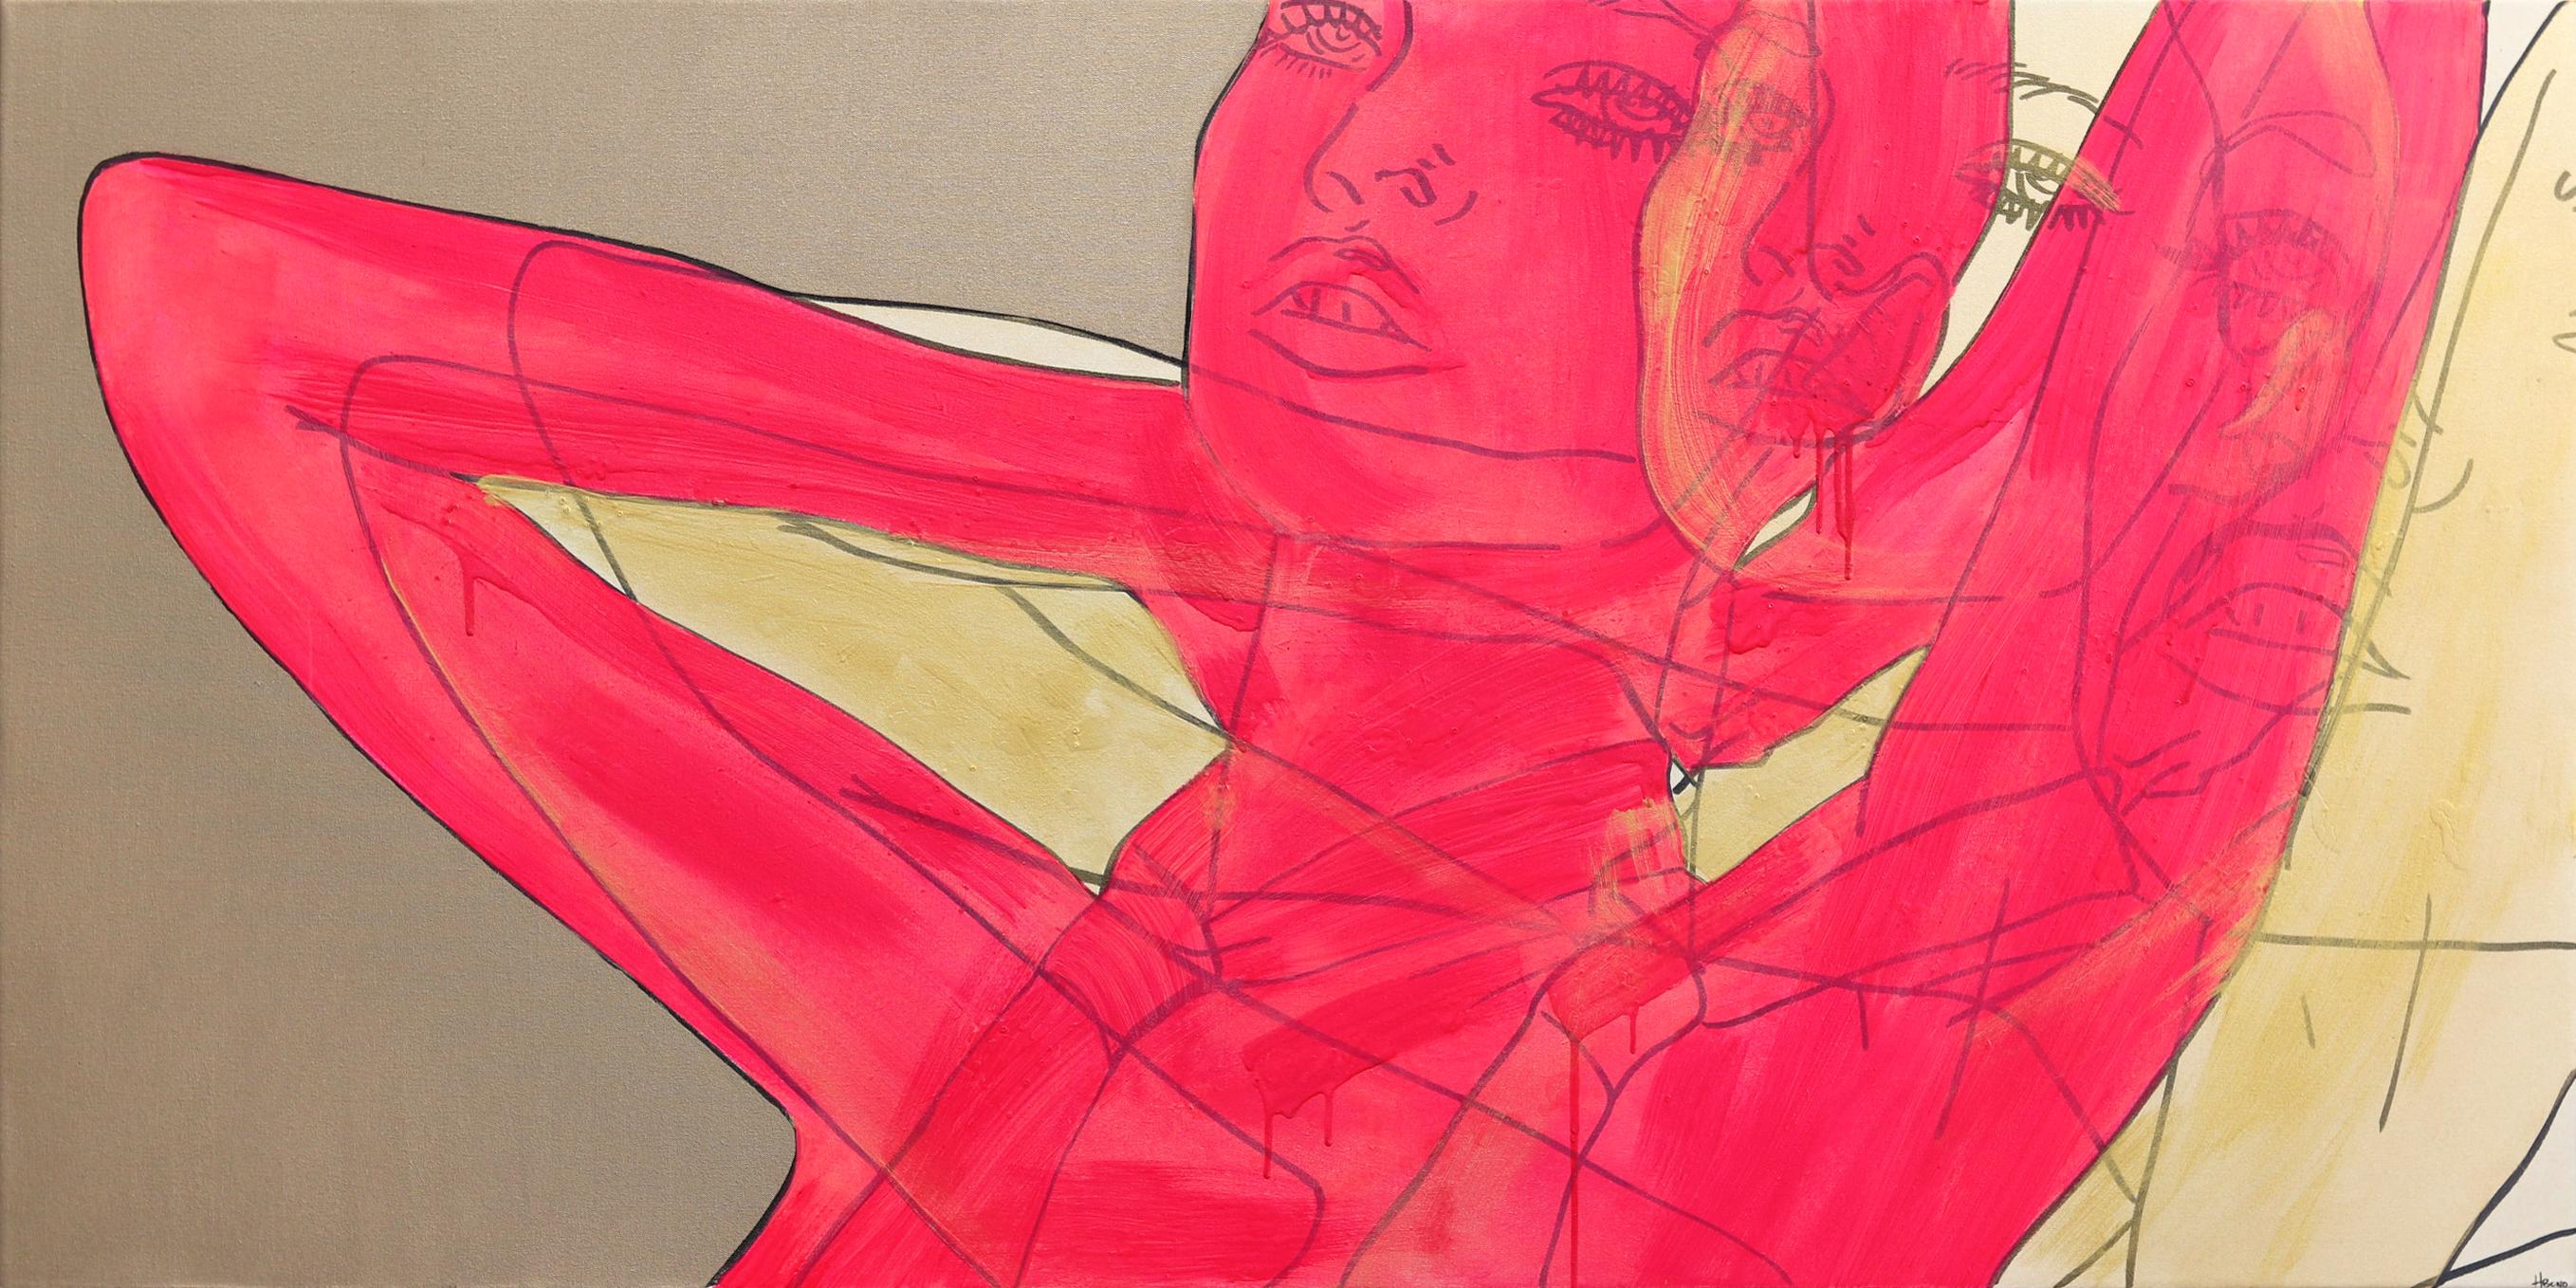 Untitled (Pink and Gold Tie) - Figurative Portrait Woman Pop Art Painting